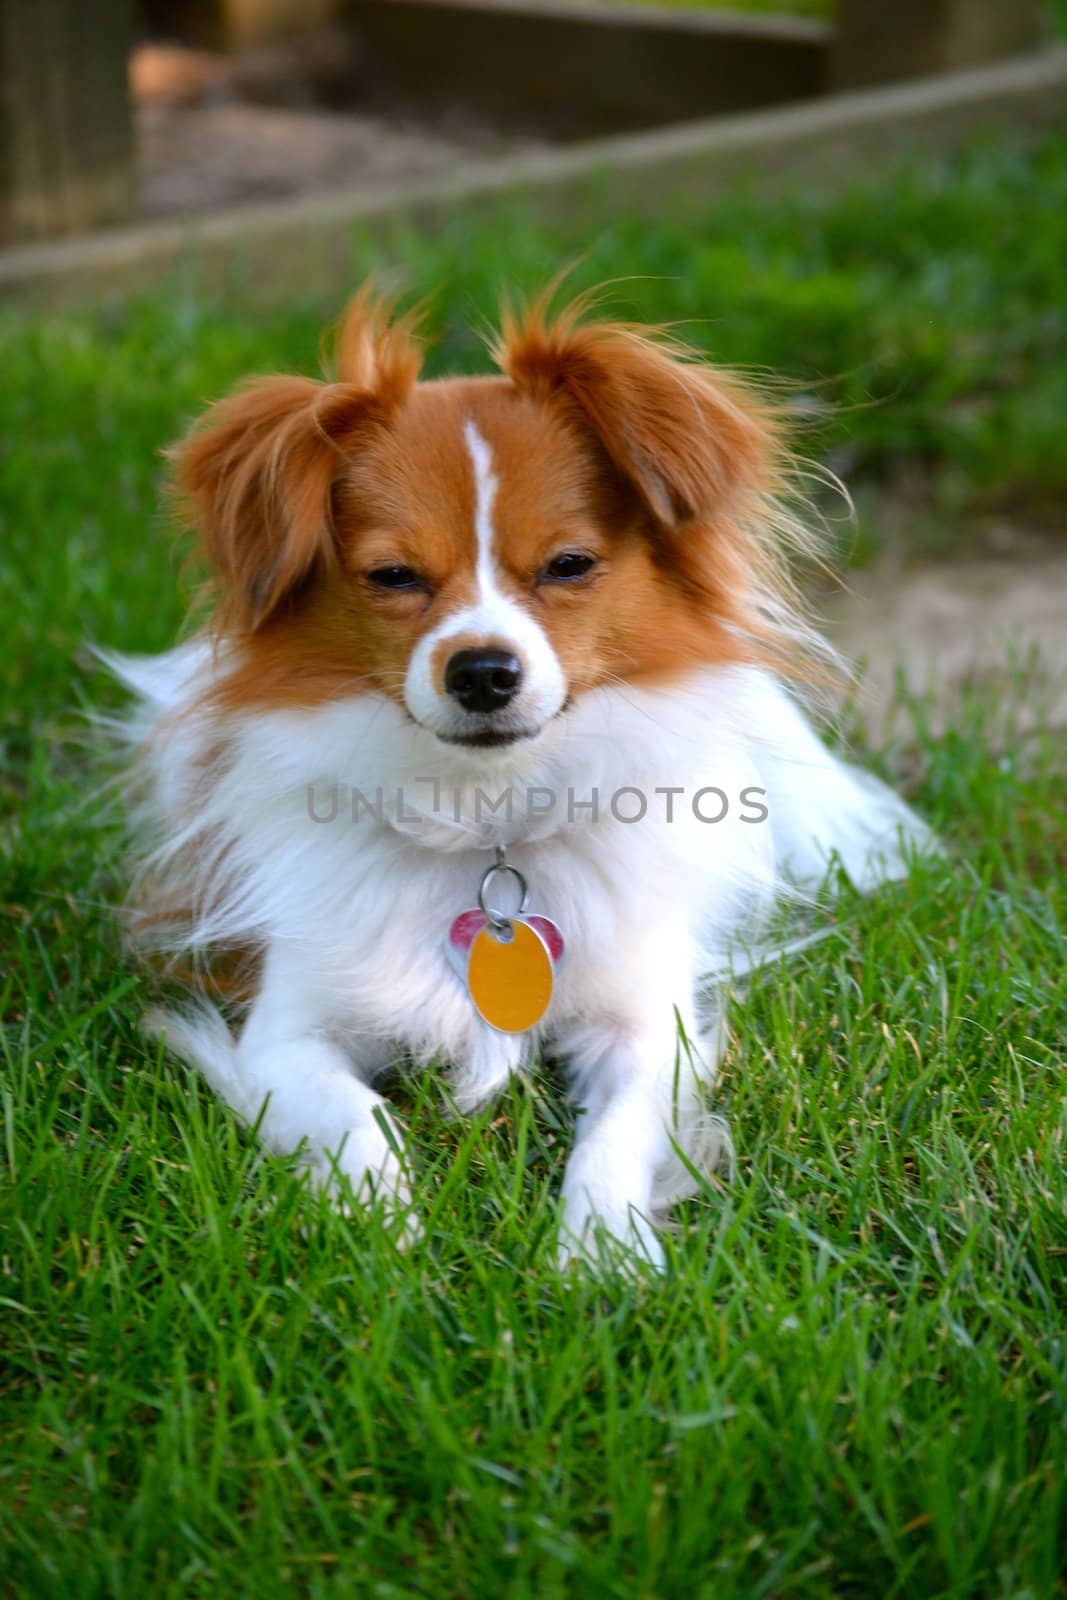 Pappillon Puppy Stares at the Camera by RefocusPhoto